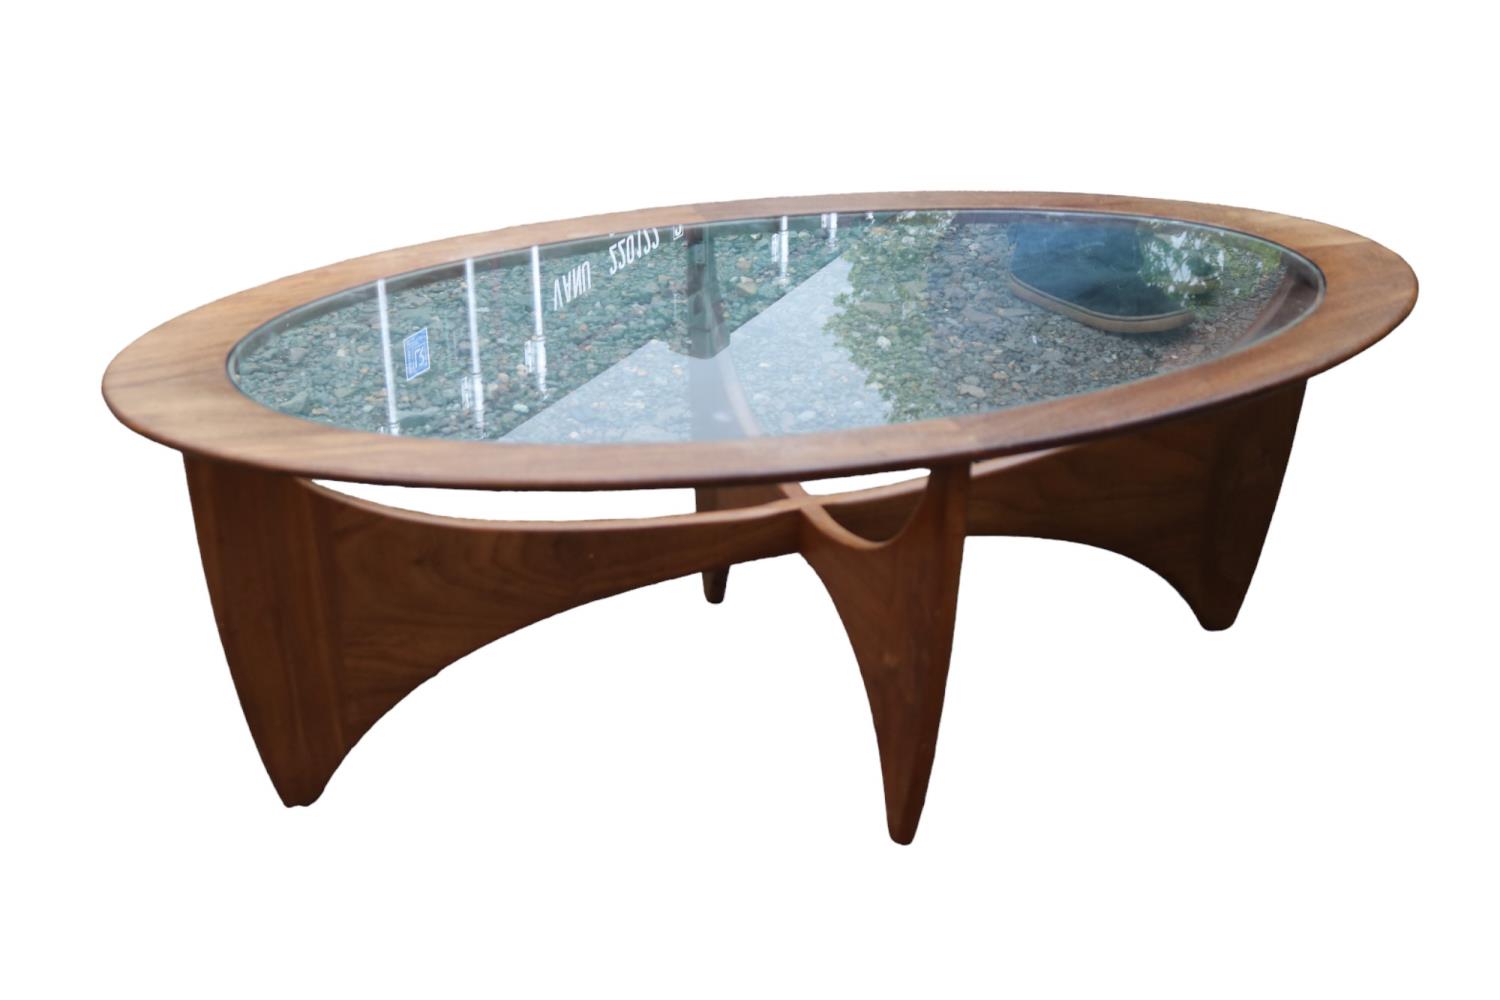 G-Plan Astro Oval Coffee table 1960s by Gordon Murray 122cm in Diameter